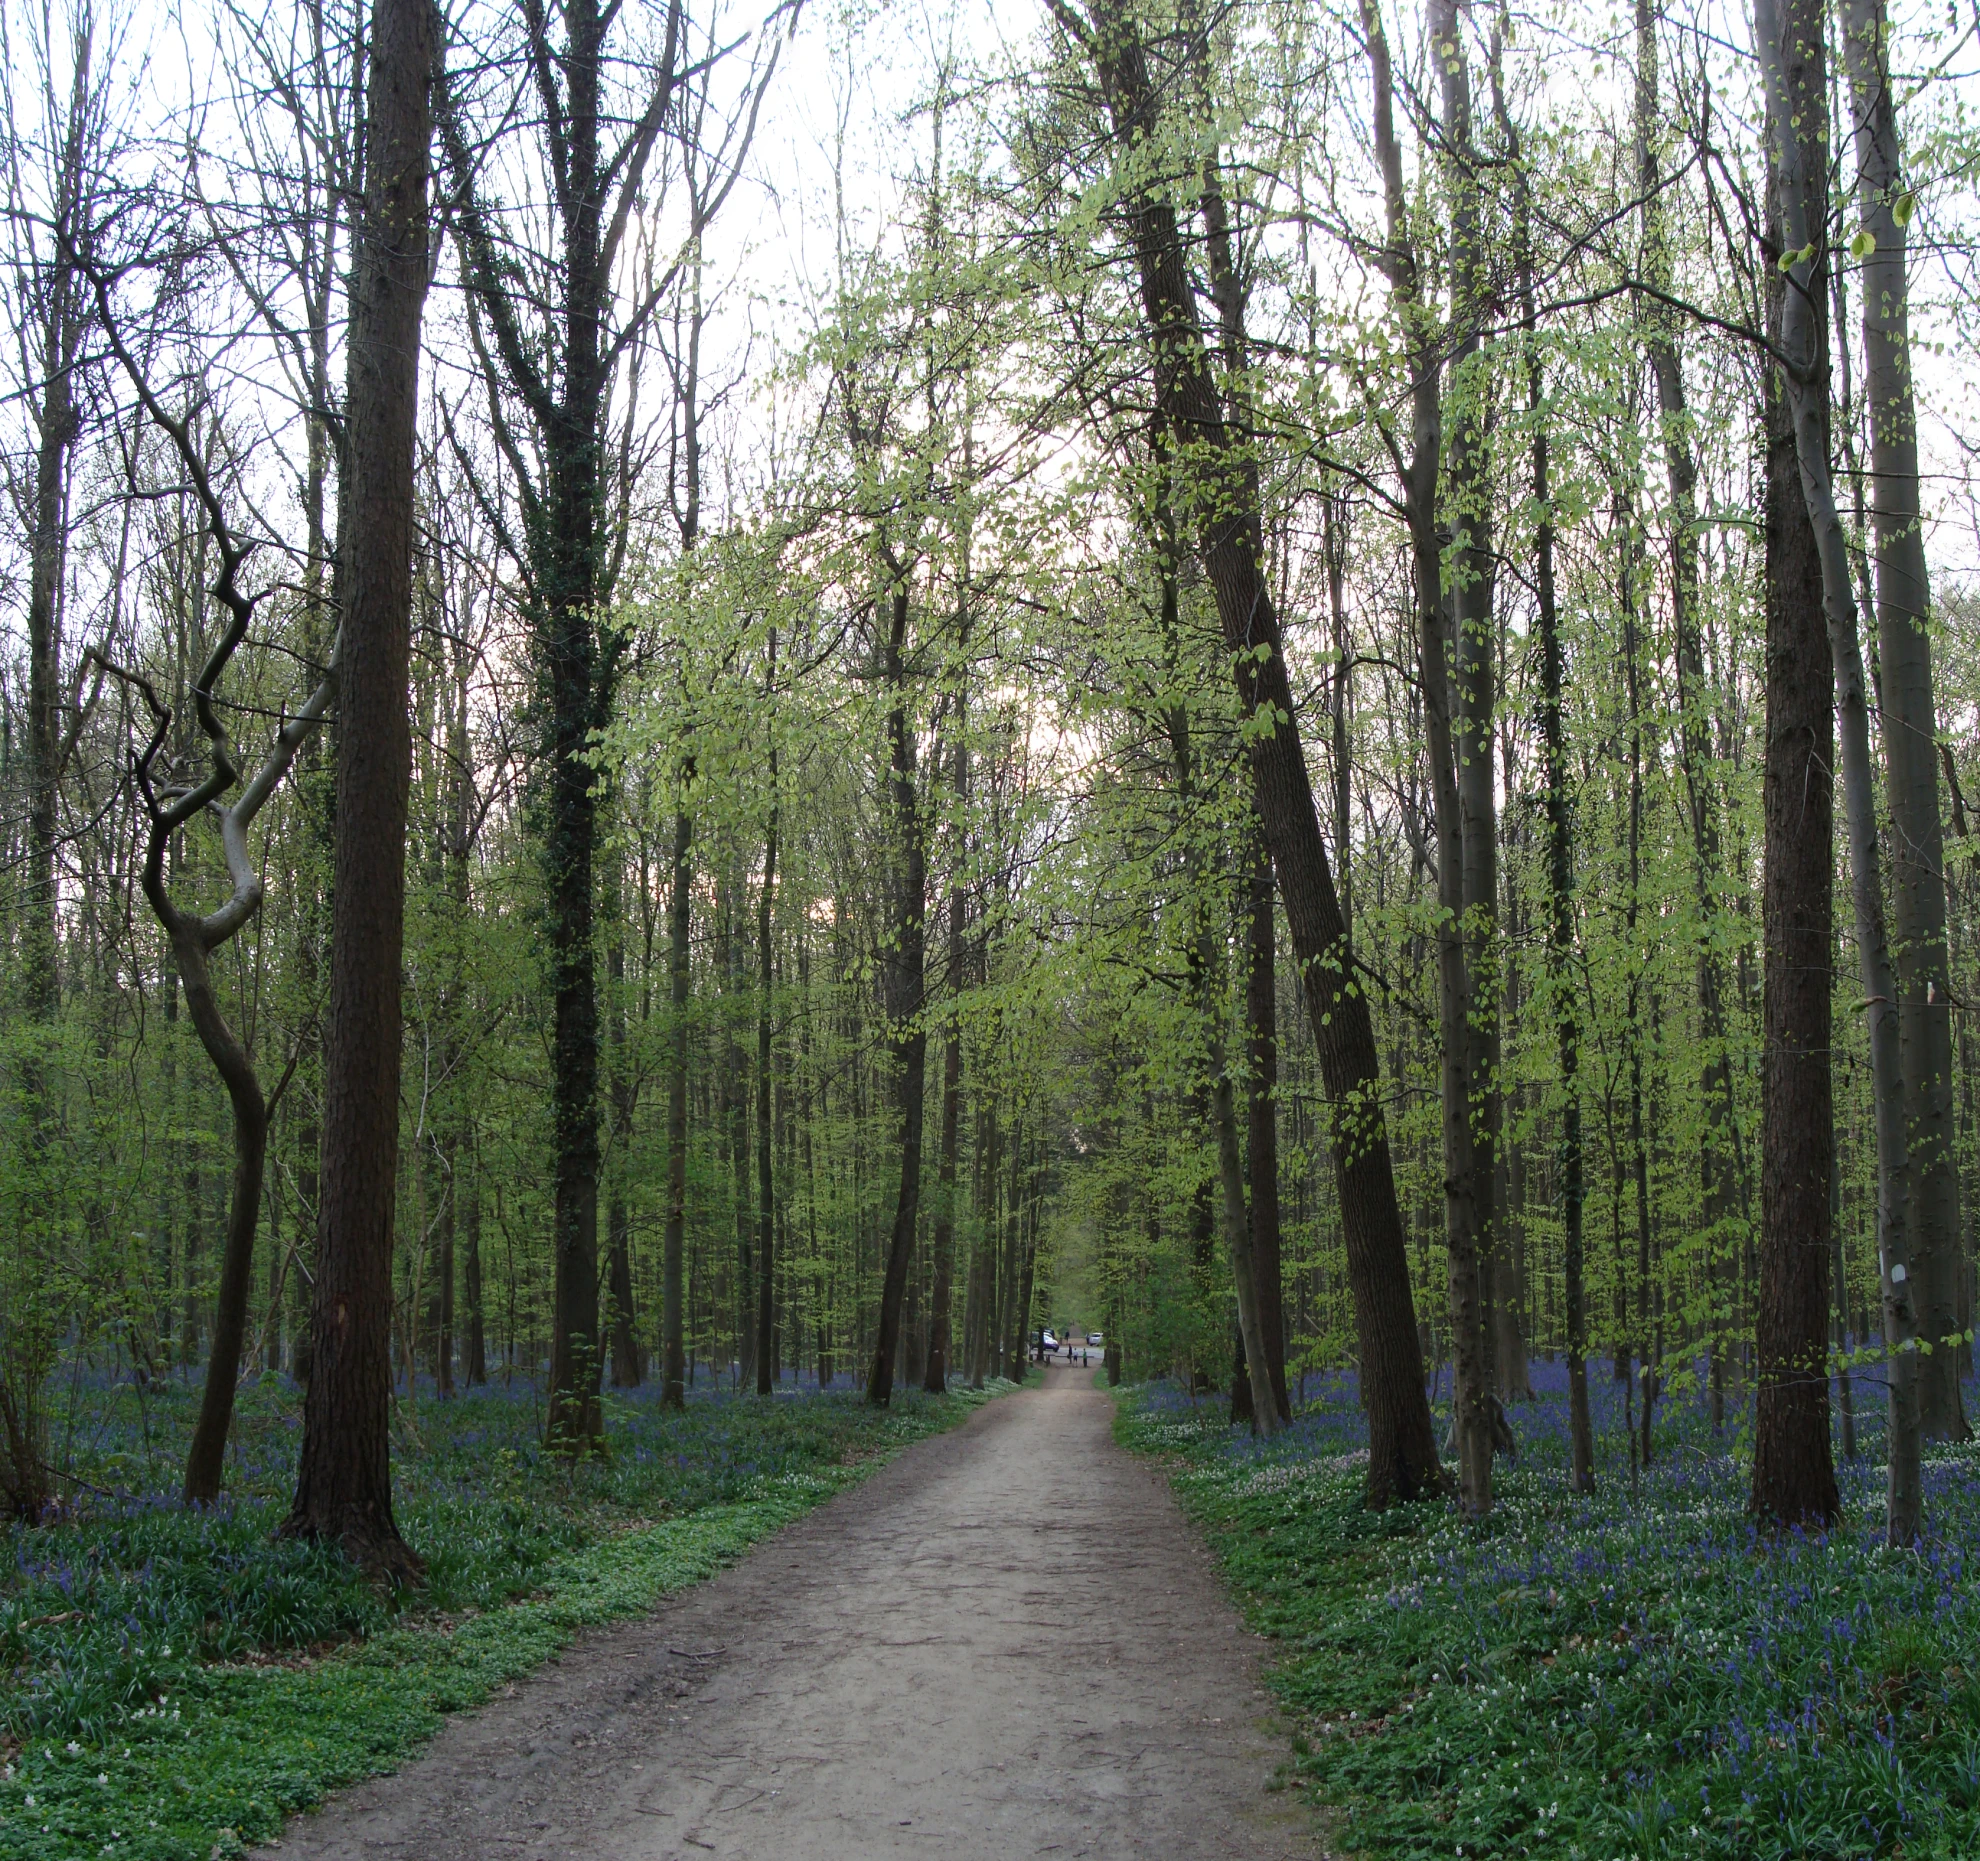 the pathway leads to an area where it was surrounded by trees and flowers